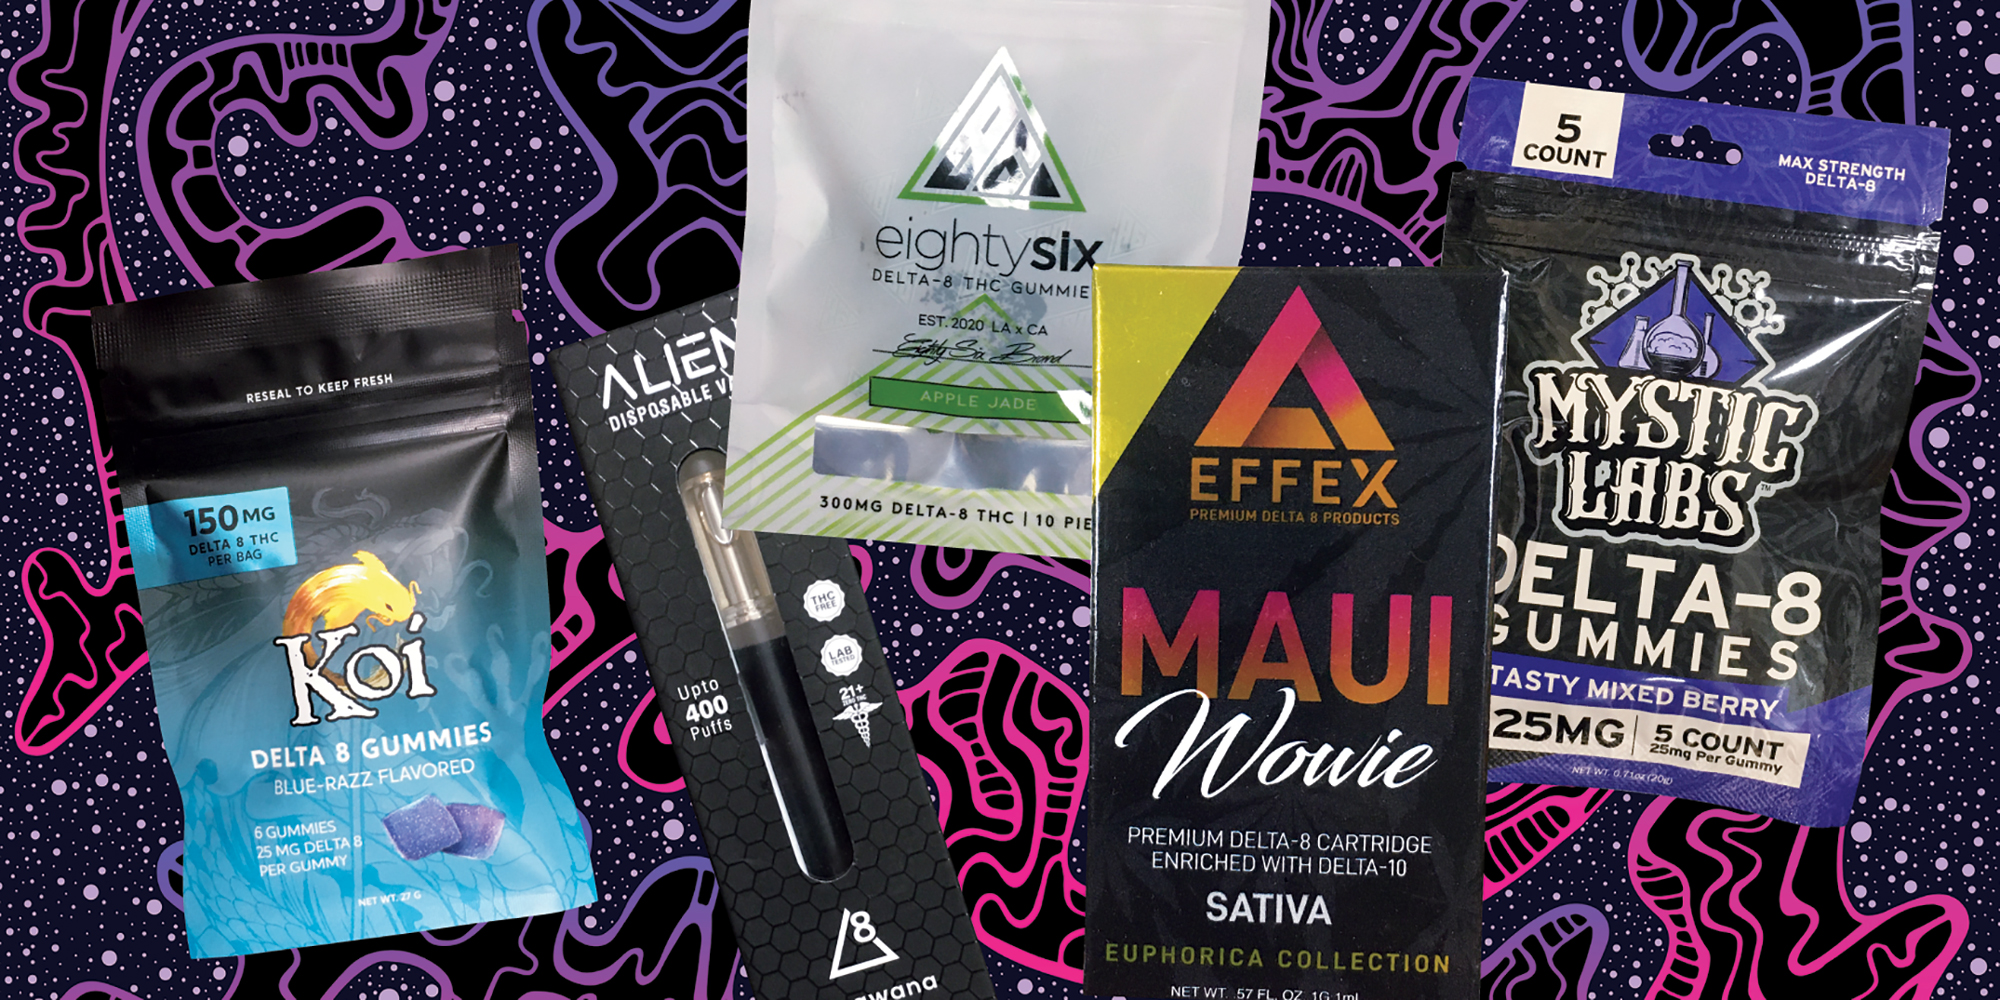 Delta-8 Online - Products|Thc|Hemp|Brand|Gummies|Product|Delta-8|Cbd|Origin|Cannabis|Delta|Users|Effects|Cartridges|Brands|Range|List|Research|Usasource|Options|Benefits|Plant|Companies|Vape|Source|Results|Gummy|People|Space|High-Quality|Quality|Place|Overview|Flowers|Lab|Drug|Cannabinoids|Tinctures|Overviewproducts|Cartridge|Delta-8 Thc|Delta-8 Products|Delta-9 Thc|Delta-8 Brands|Usa Source|Delta-8 Thc Products|Cannabis Plant|Federal Level|United States|Delta-8 Gummies|Delta-8 Space|Health Canada|Delta Products|Delta-8 Thc Gummies|Delta-8 Companies|Vape Cartridges|Similar Benefits|Hemp Doctor|Brand Overviewproducts|Drug Test|High-Quality Products|Organic Hemp|San Jose|Editorial Team|Farm Bill|Overview Products|Wide Range|Psychoactive Properties|Reliable Provider|Boston Hempire